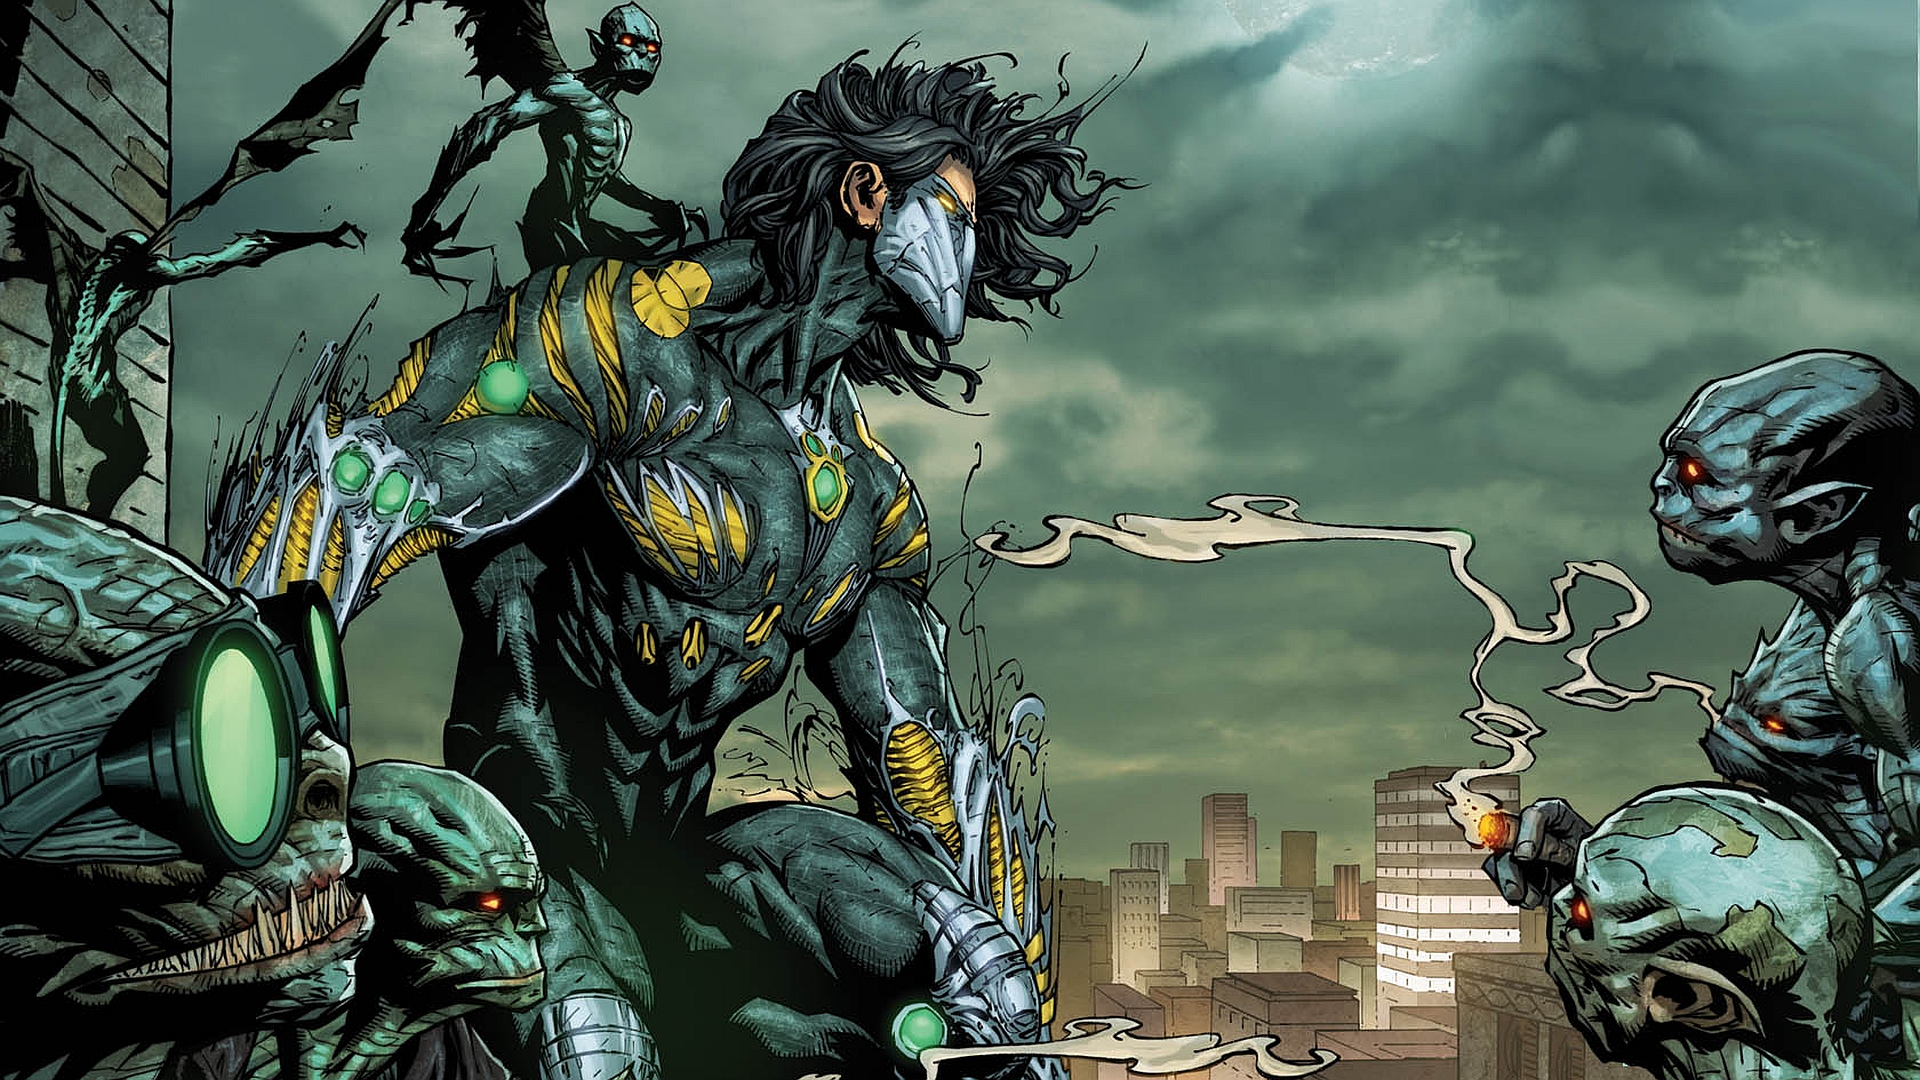 Comics The Darkness HD Wallpaper | Background Image